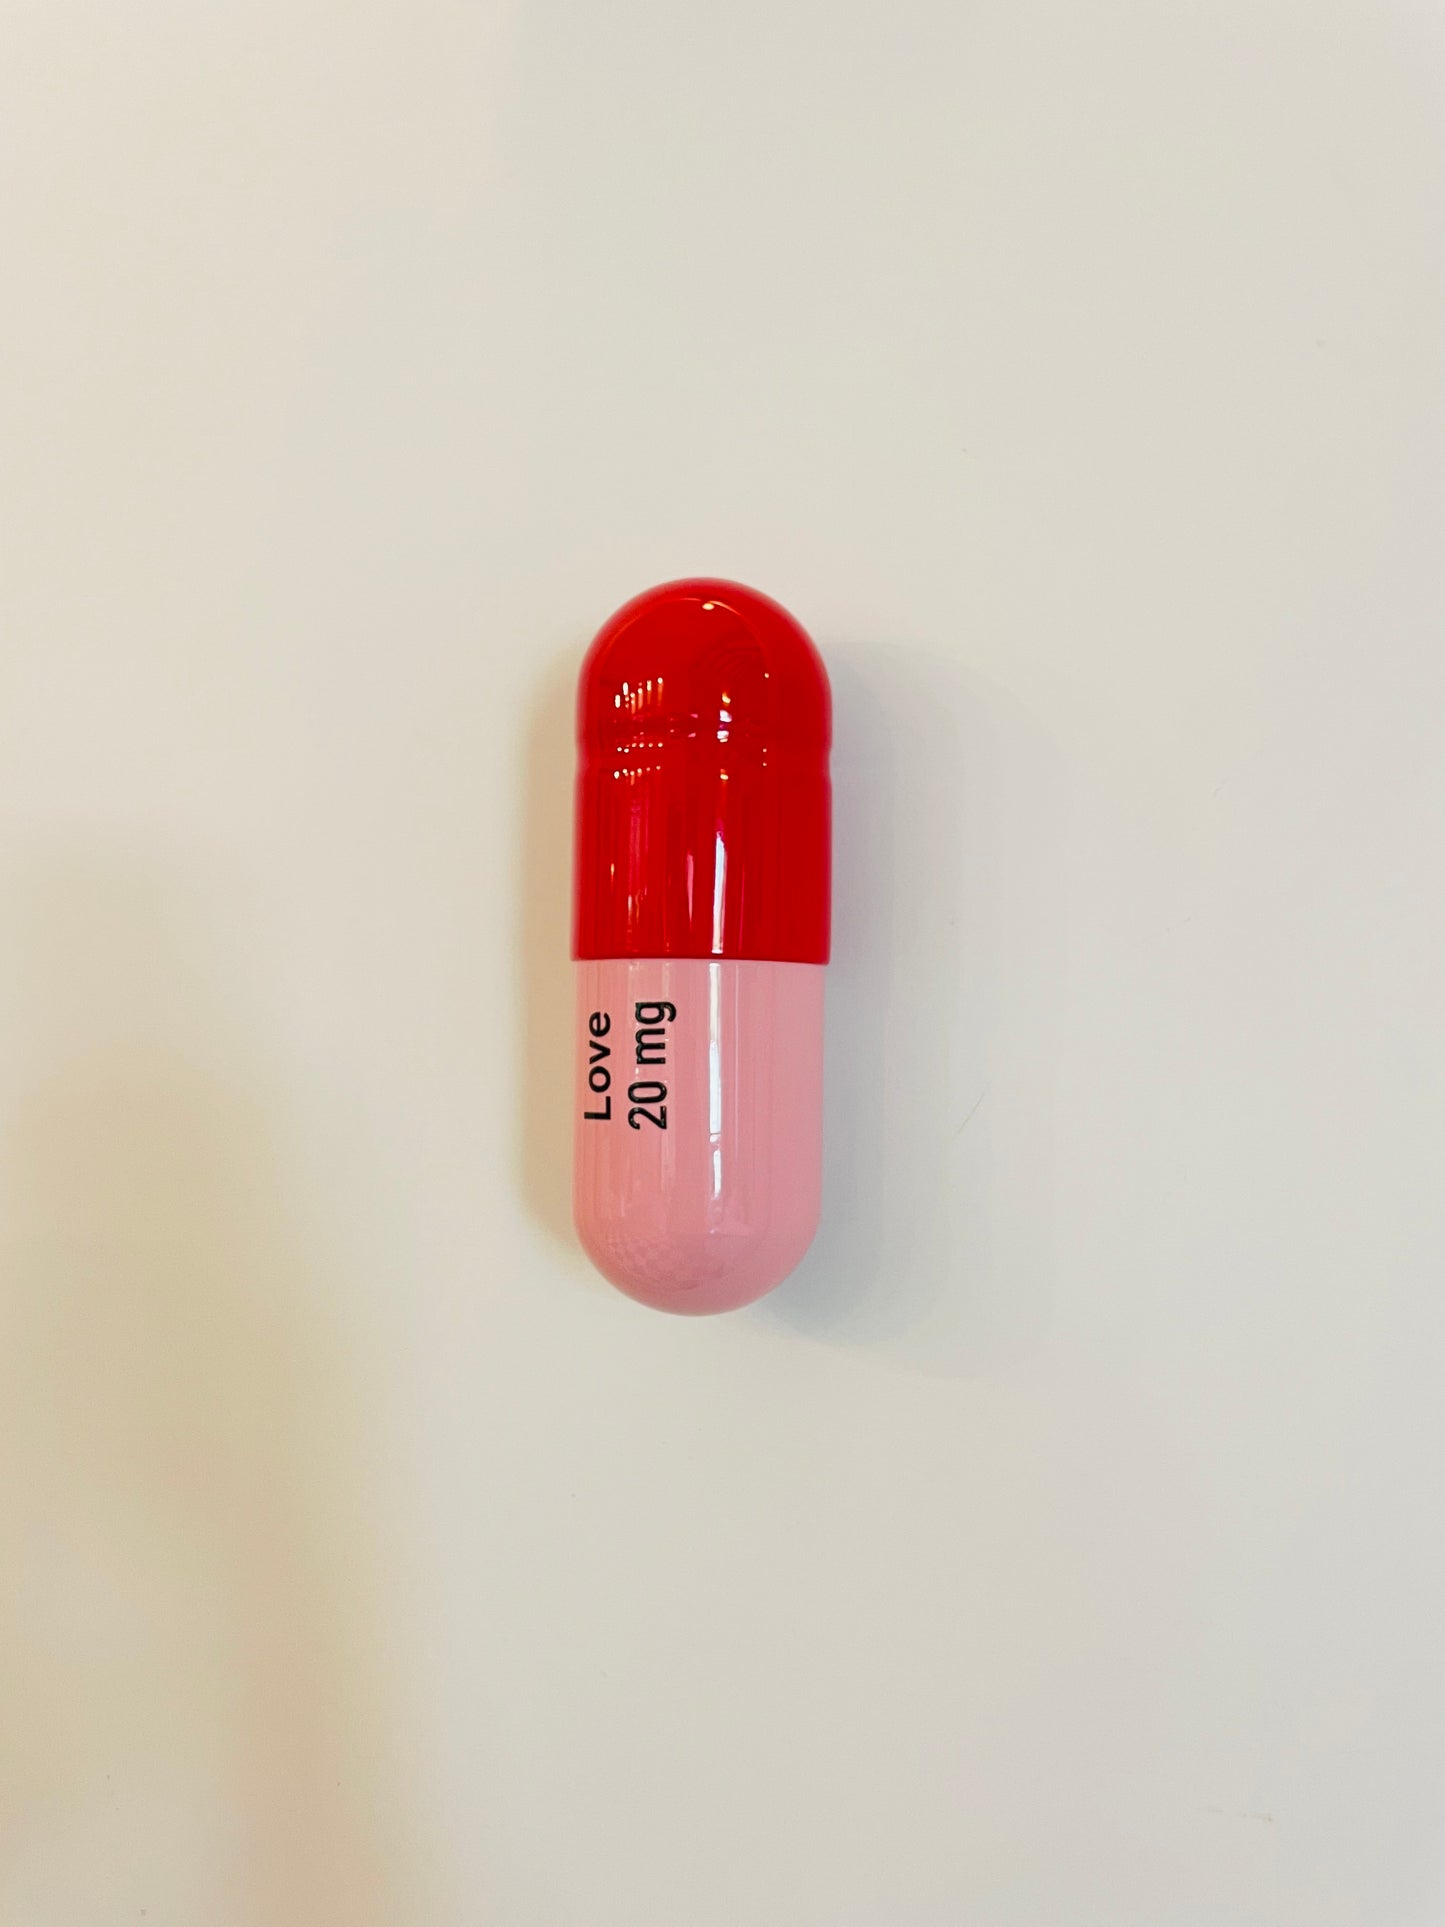 Ceramic Love Pill - Red and Light Pink